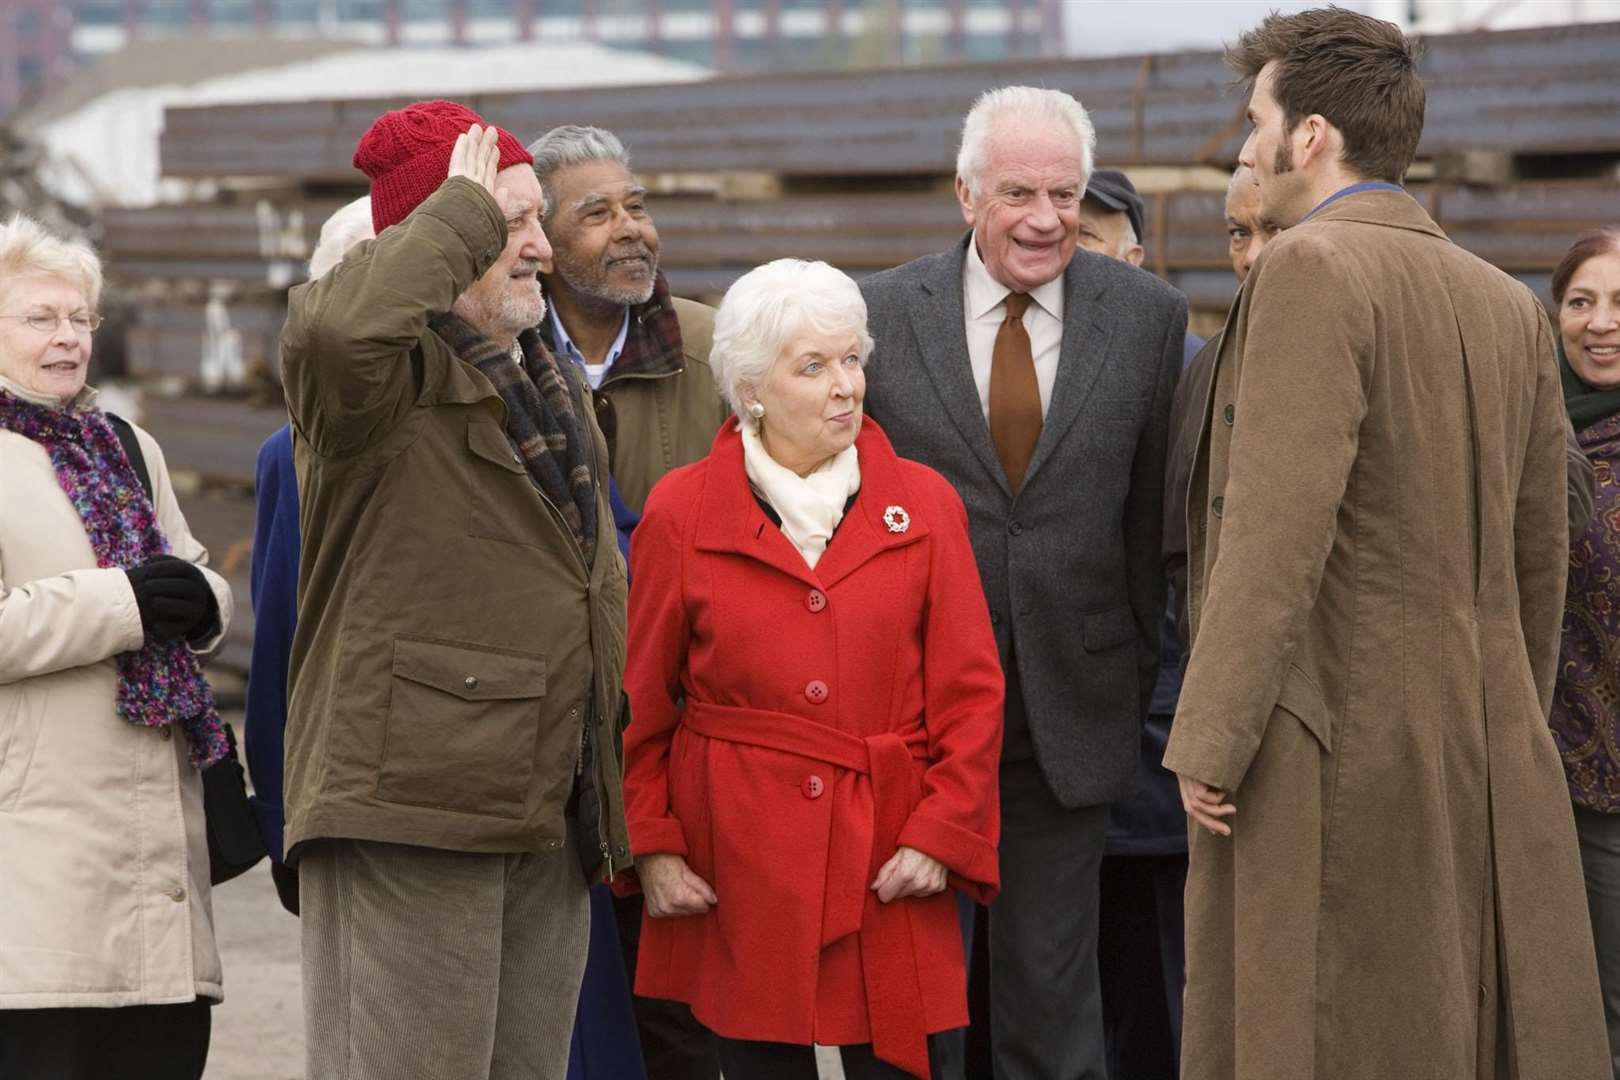 Bernard Cribbins with fellow Doctor Who cast members June Whitfield, Barry Howard and David Tennant in a scene from Doctor Who The End of Time, Part One (Adrian Rogers/BBC/PA)